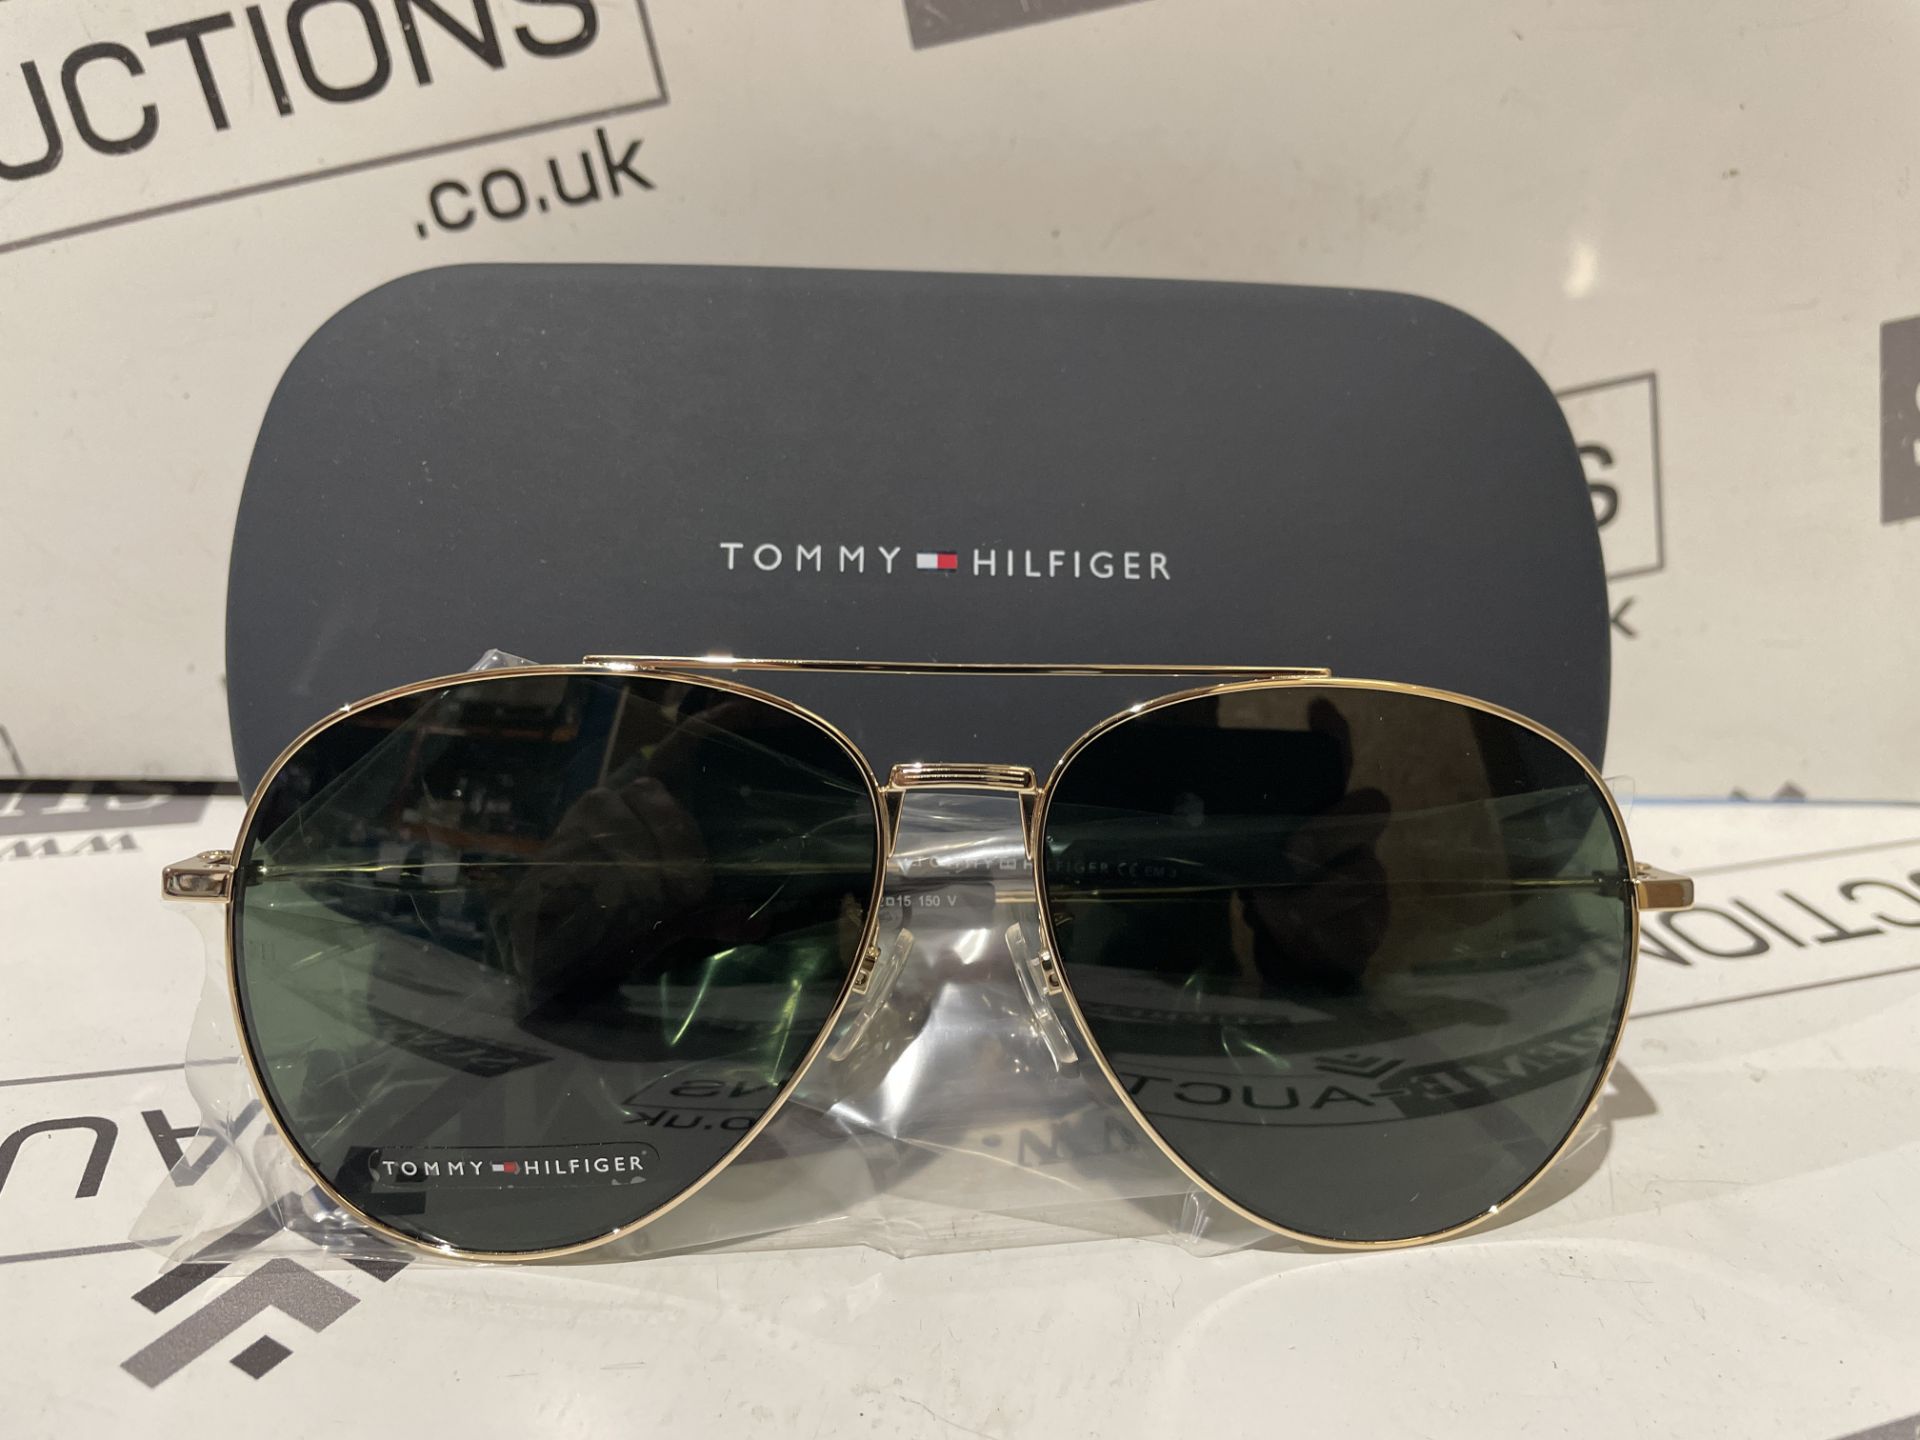 BRAND NEW PAIR OF TOMMY HILFIGER TH 1896 AVAIATOR SUNGLASSES S/R1